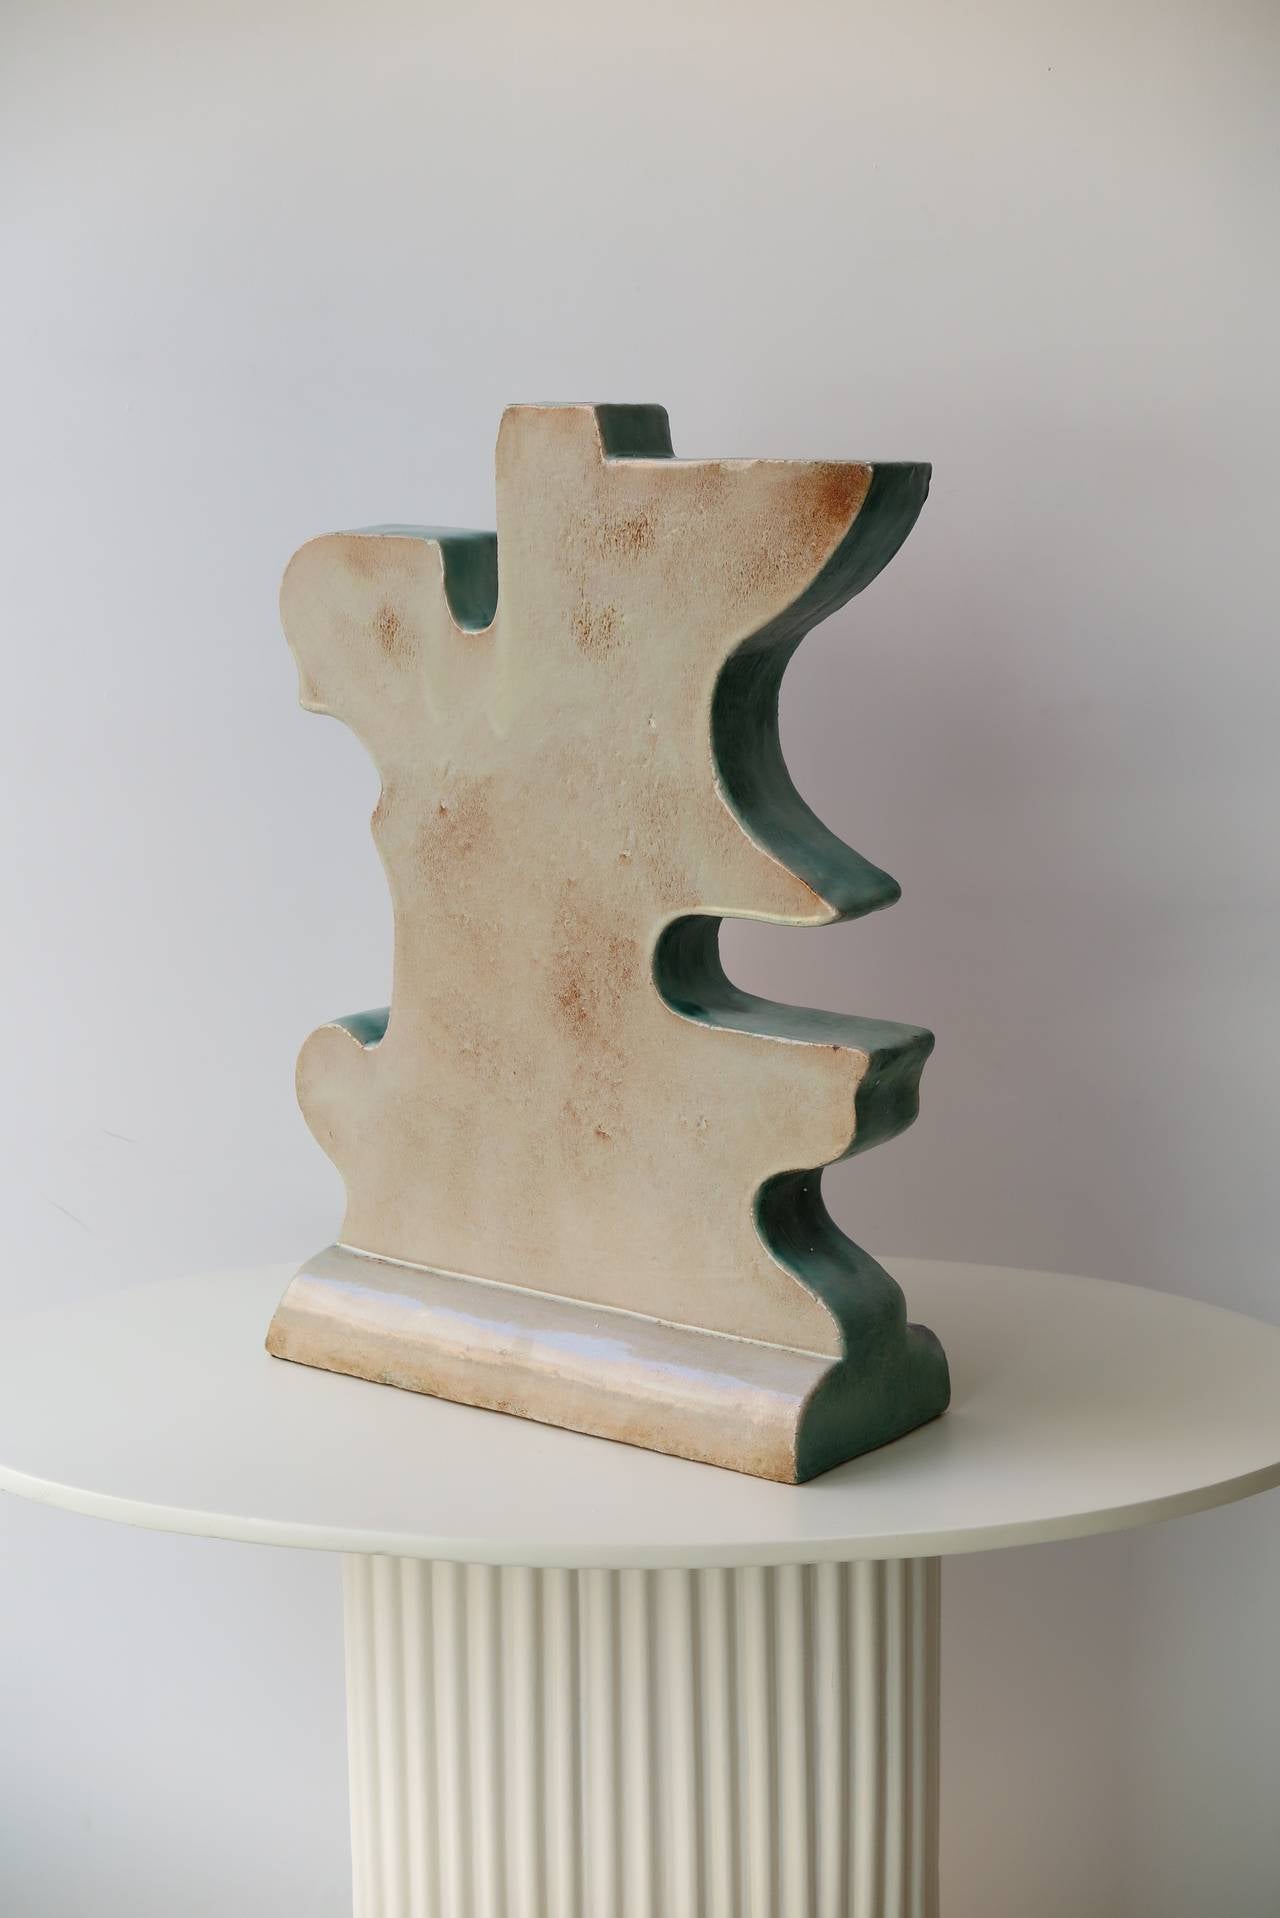 An important unique studio sculpture in ceramic, double faced with blue and cream shades and green borders by Marcello Fantoni, Italy, (1915-2011), 1959. Signed Fantoni 59. Could also be used as a table lamp.
Provenance: From an Italian collector.